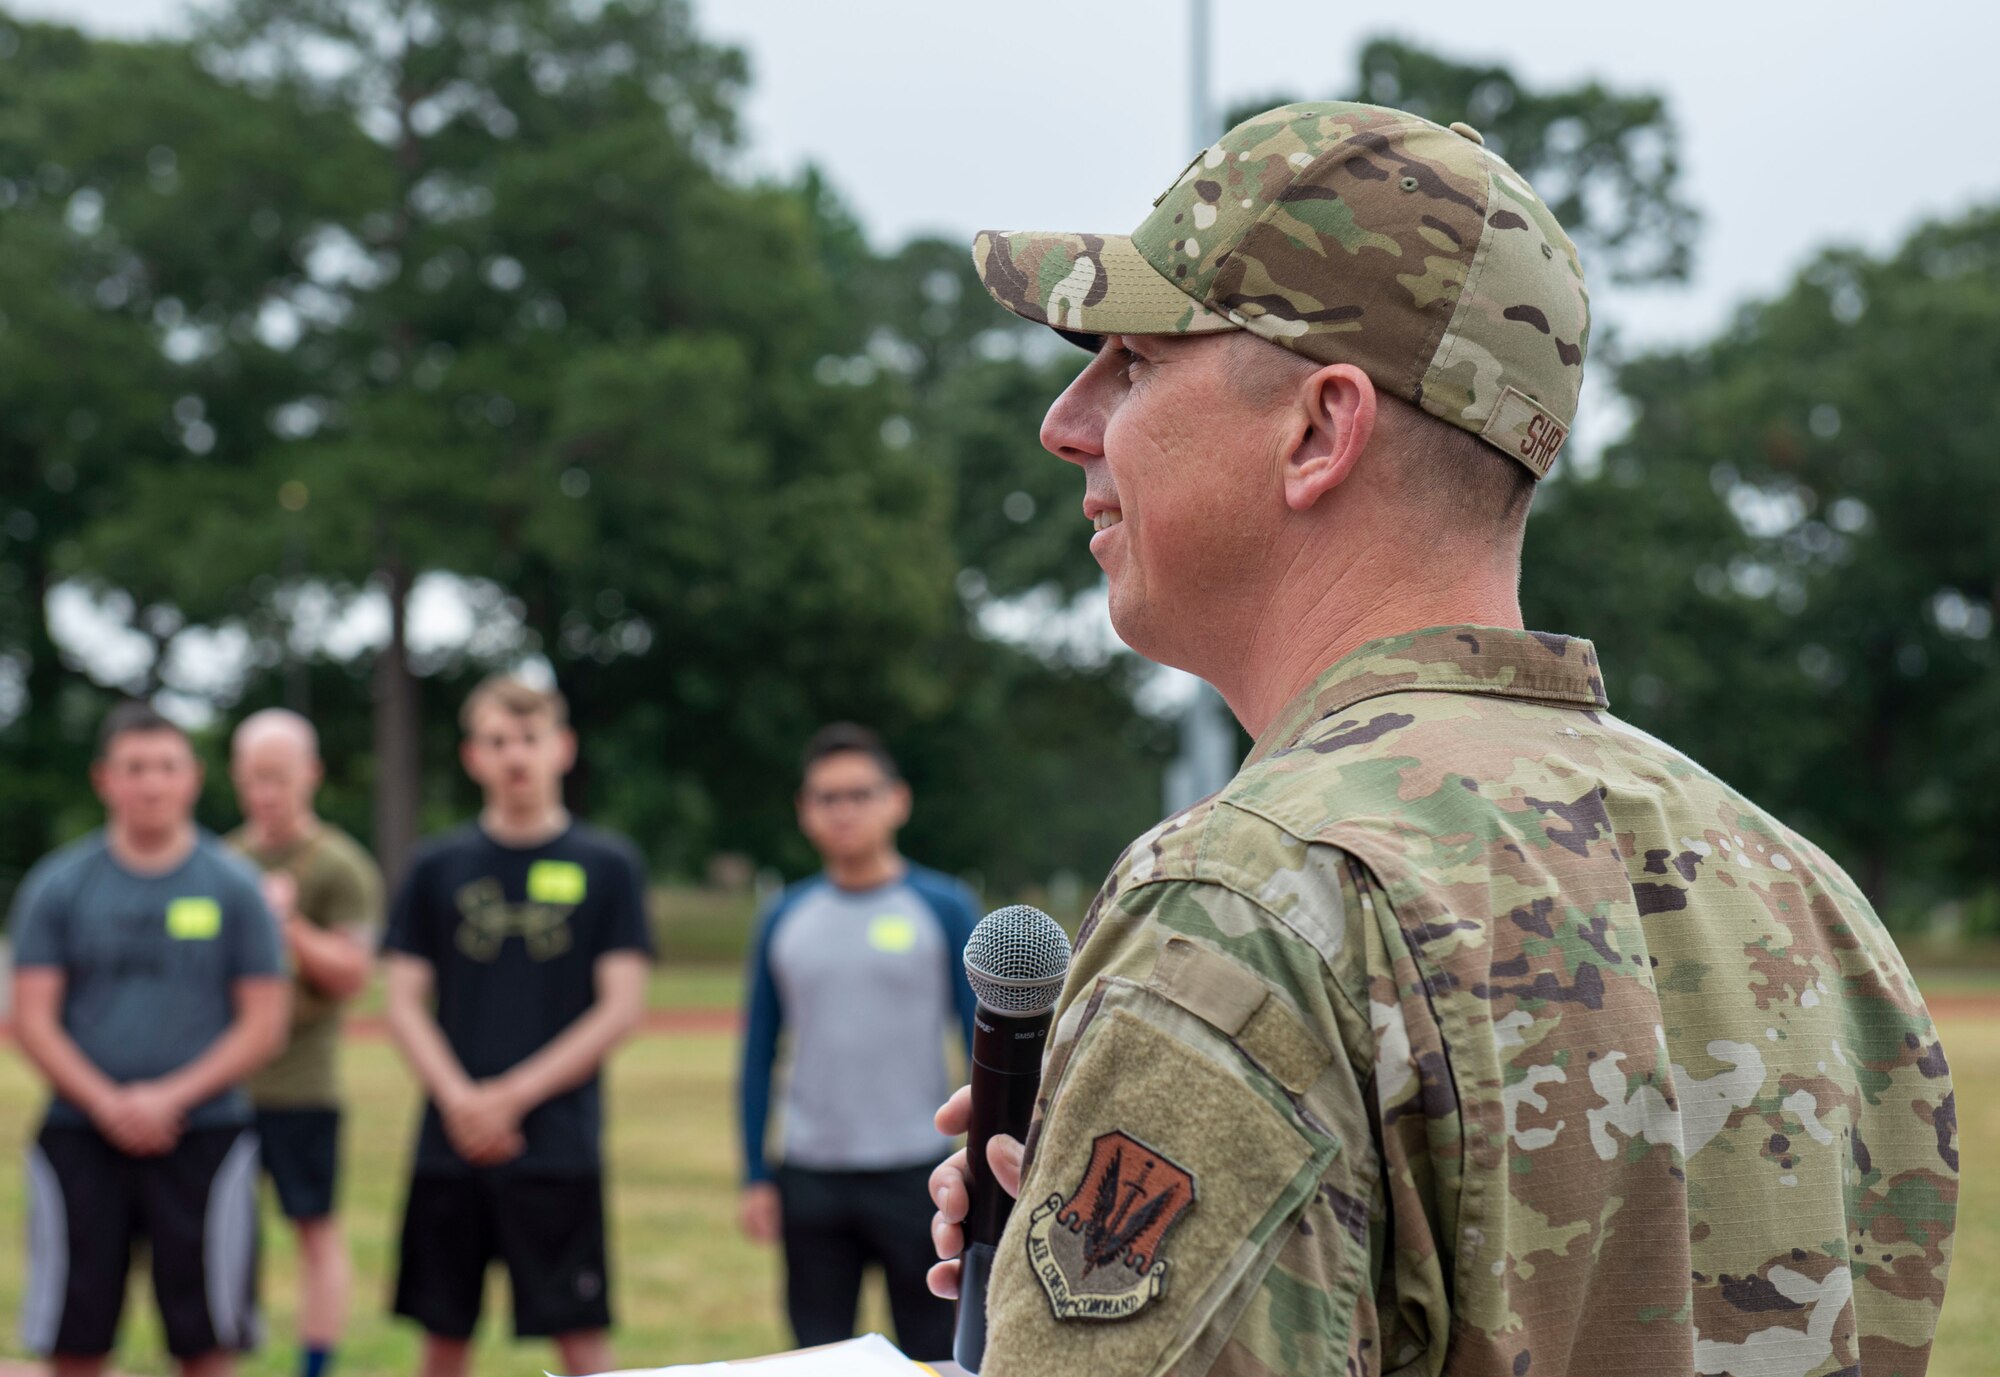 Capt. David Shrader, 4th Fighter Wing chaplain, speaks to participants before a Murph Challenge at Seymour Johnson Air Force Base, North Carolina, May 26, 2022. Shrader challenged participants to achieve above their expectations during the competition. (U.S. Air Force photo by Airman 1st Class Sabrina Fuller)